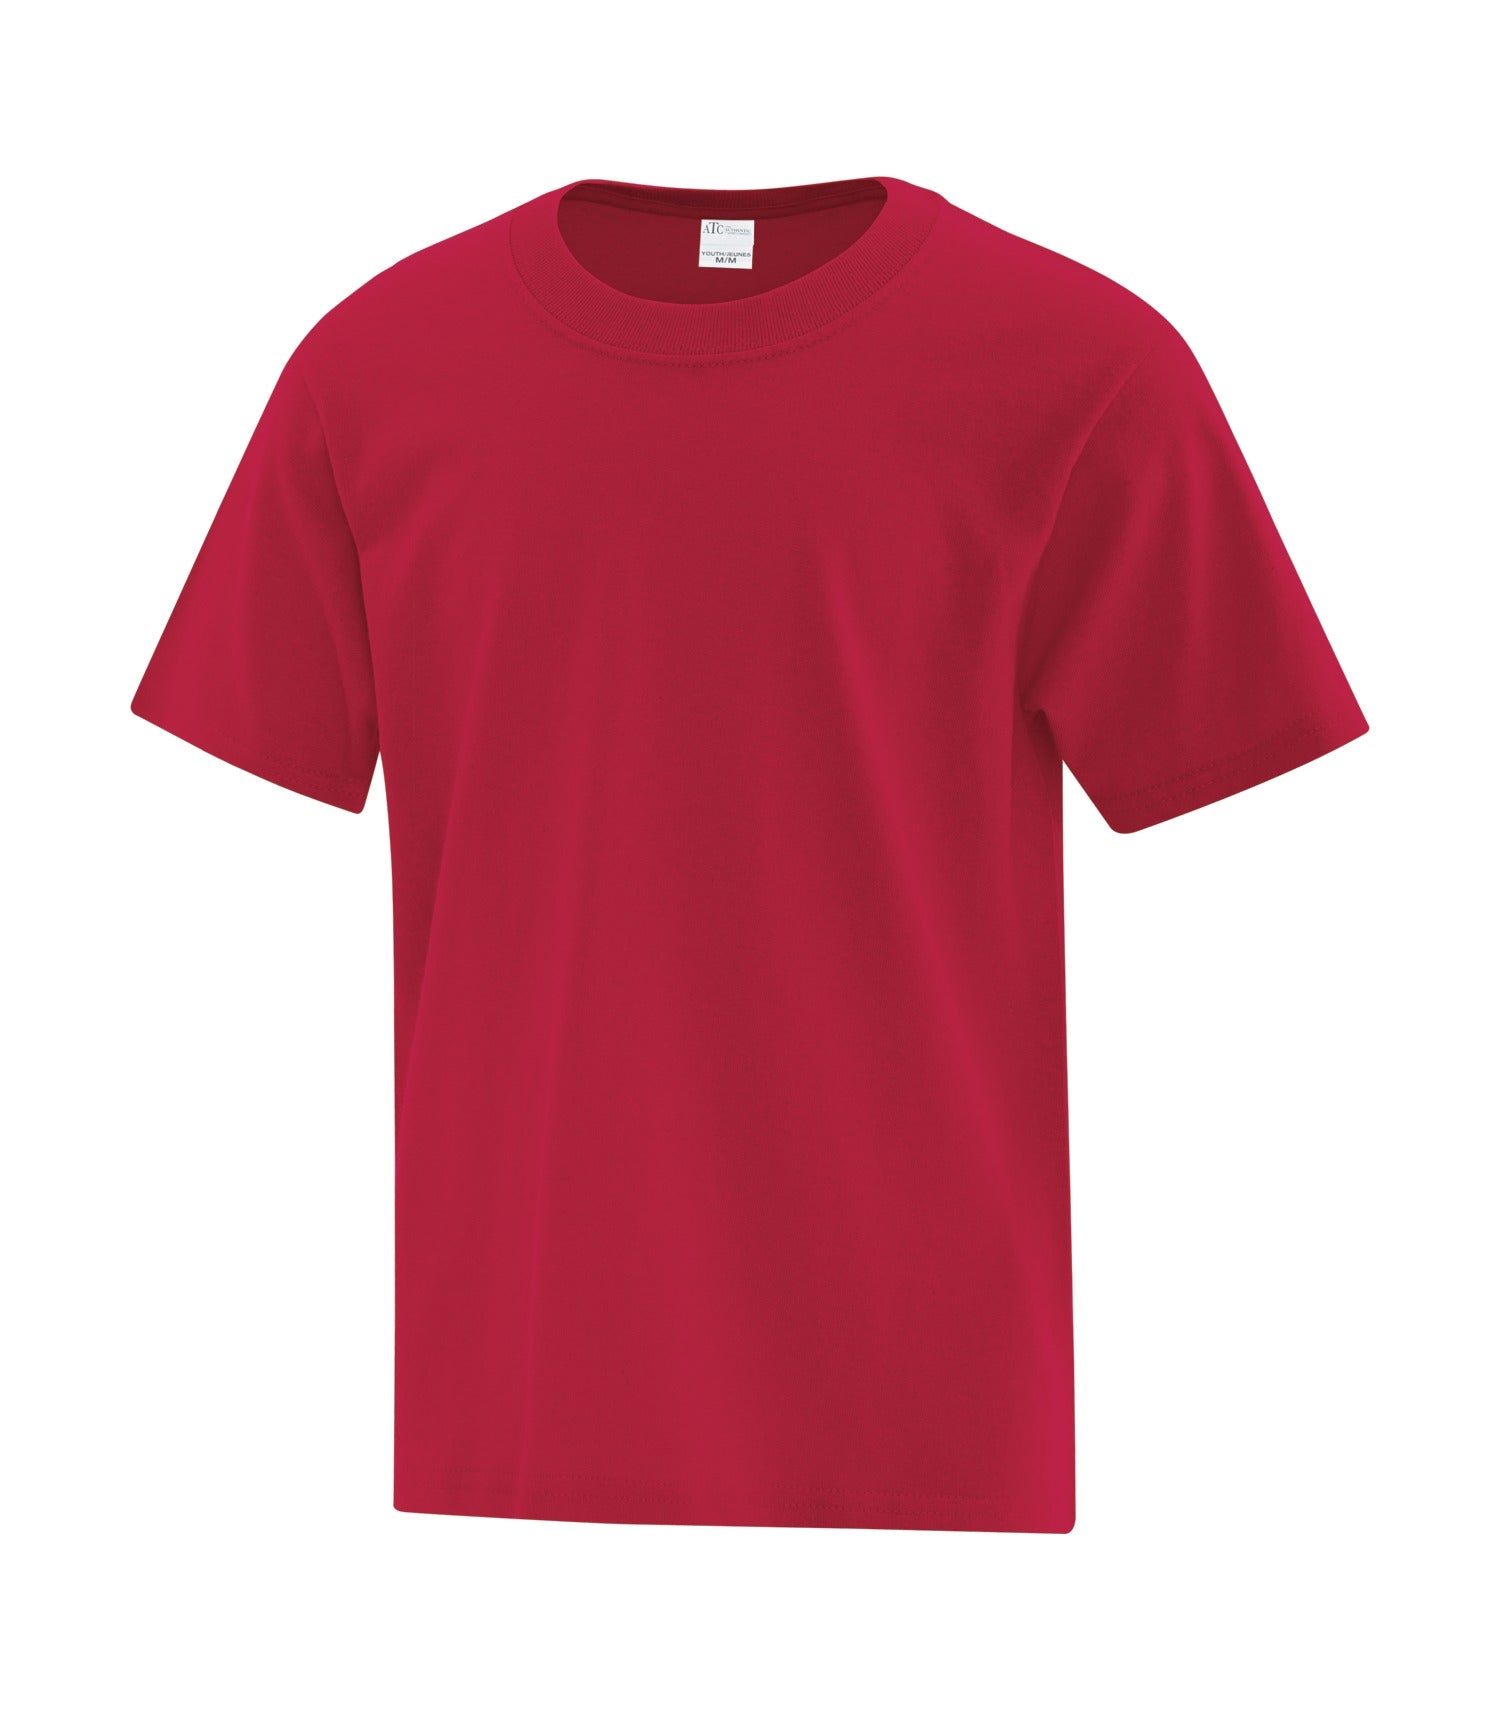 Red cotton Tees